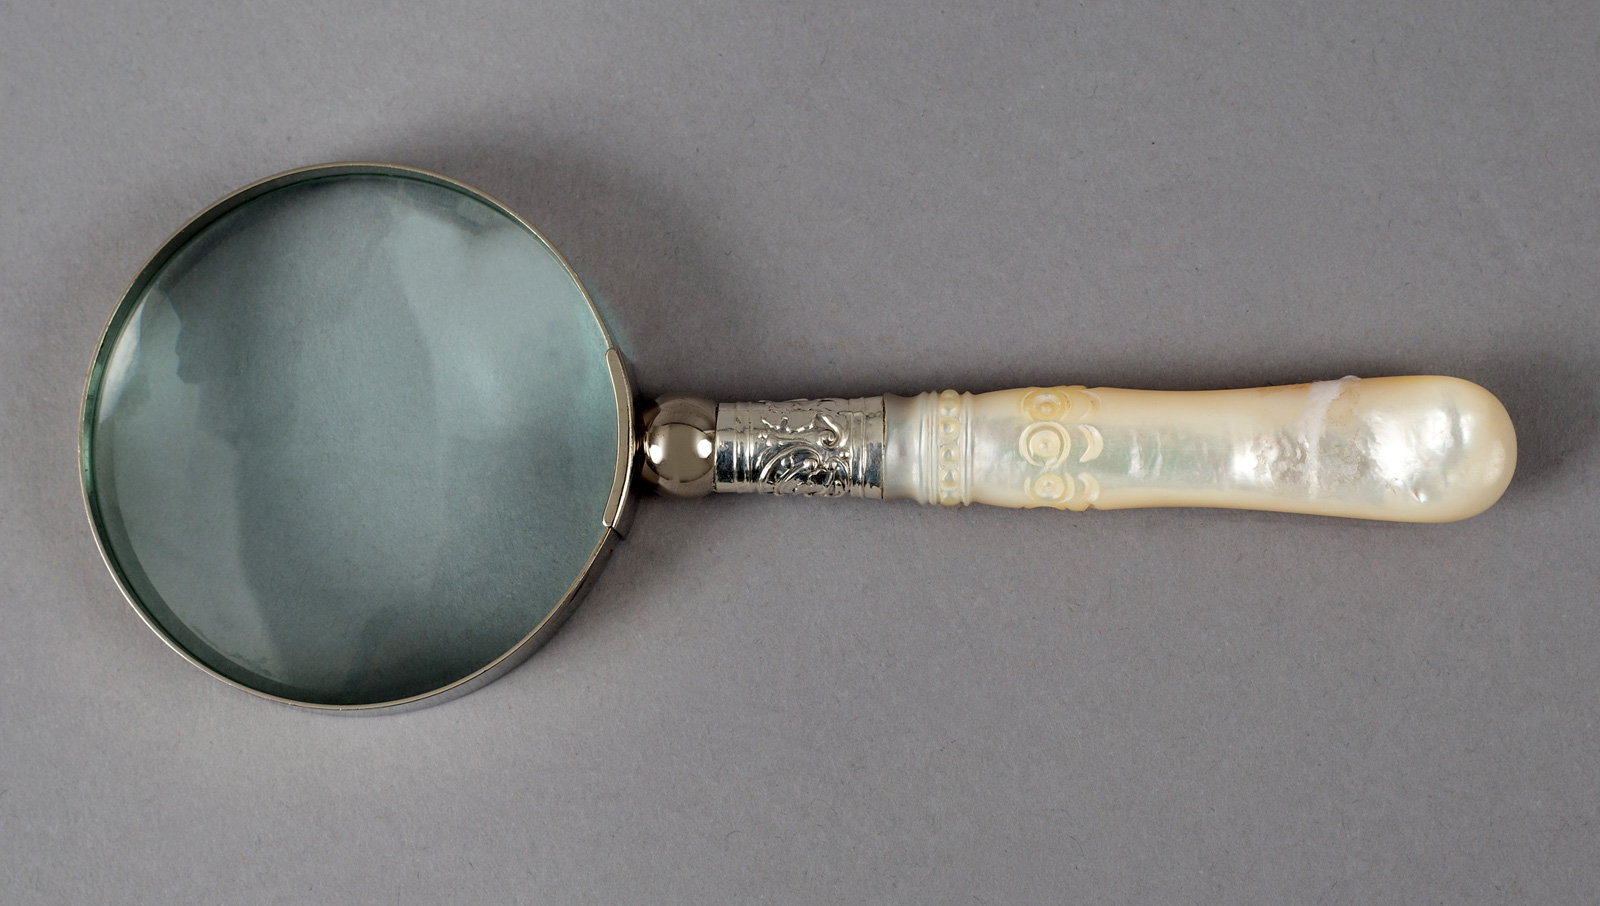 Antique Small Magnifying Glass with Mother-of-Pearl Handle